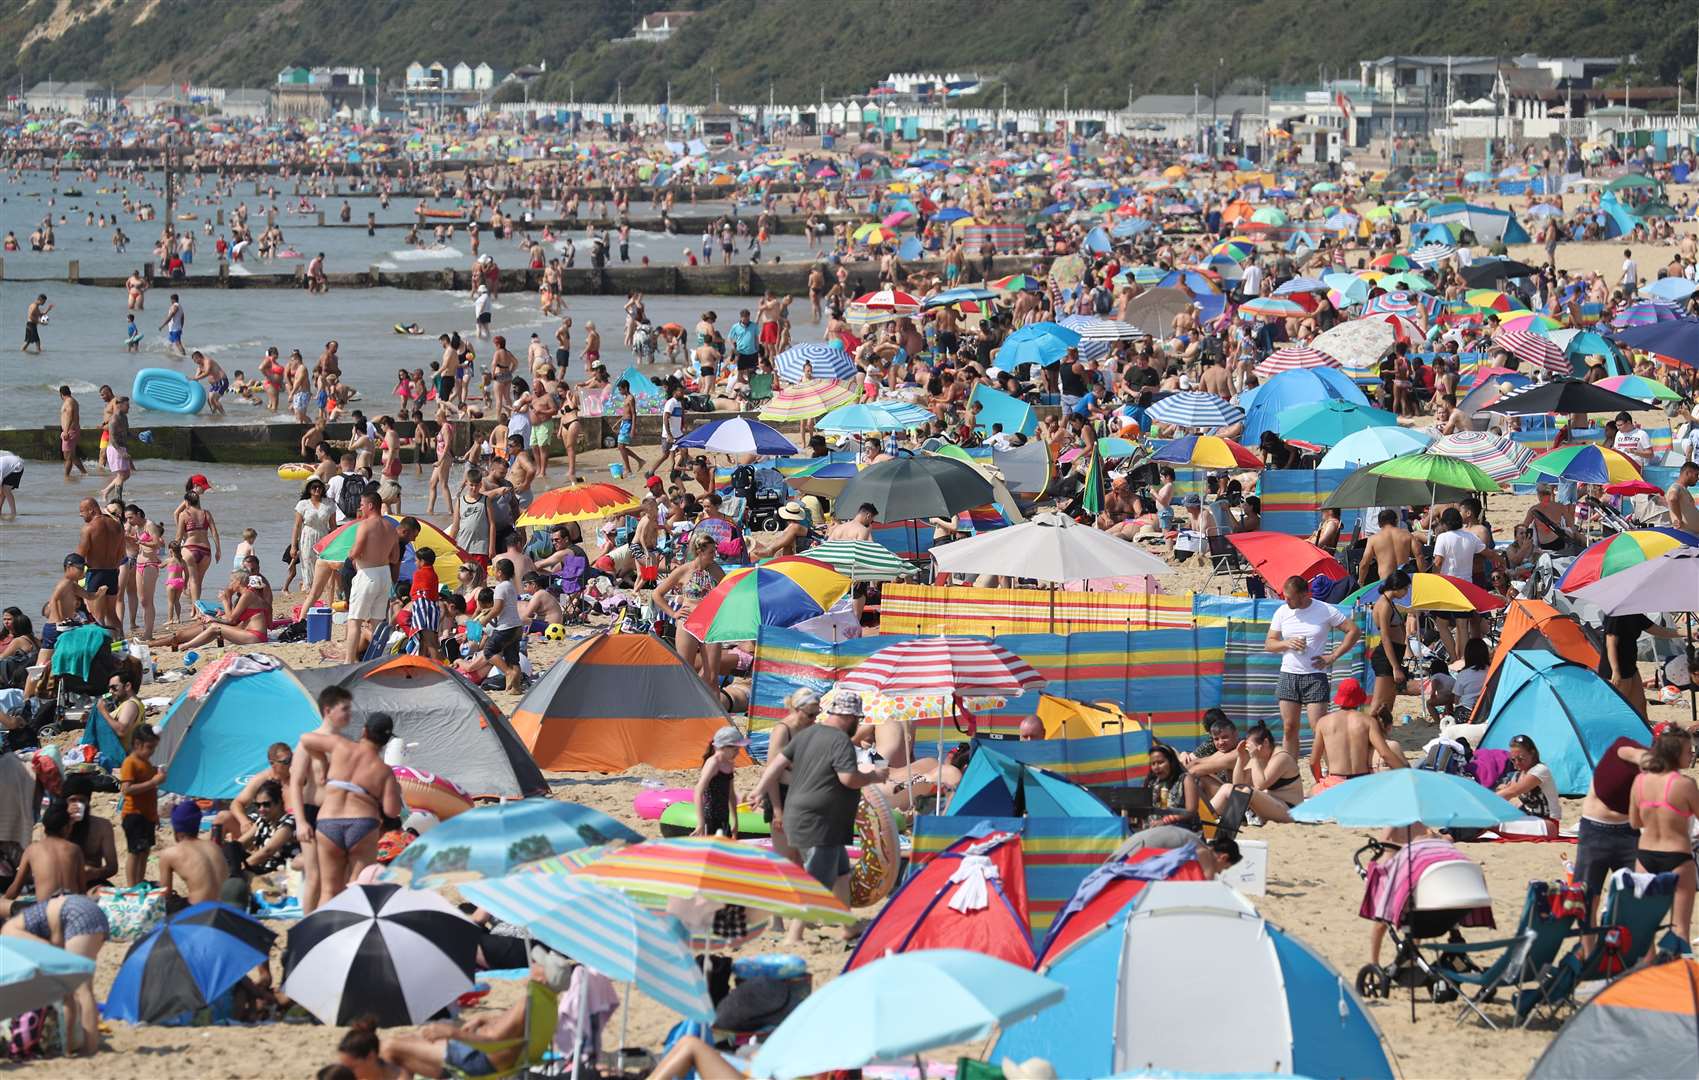 The busy scenes at Bournemouth prompted concerns over a lack of social distancing (Andrew Matthews/PA)